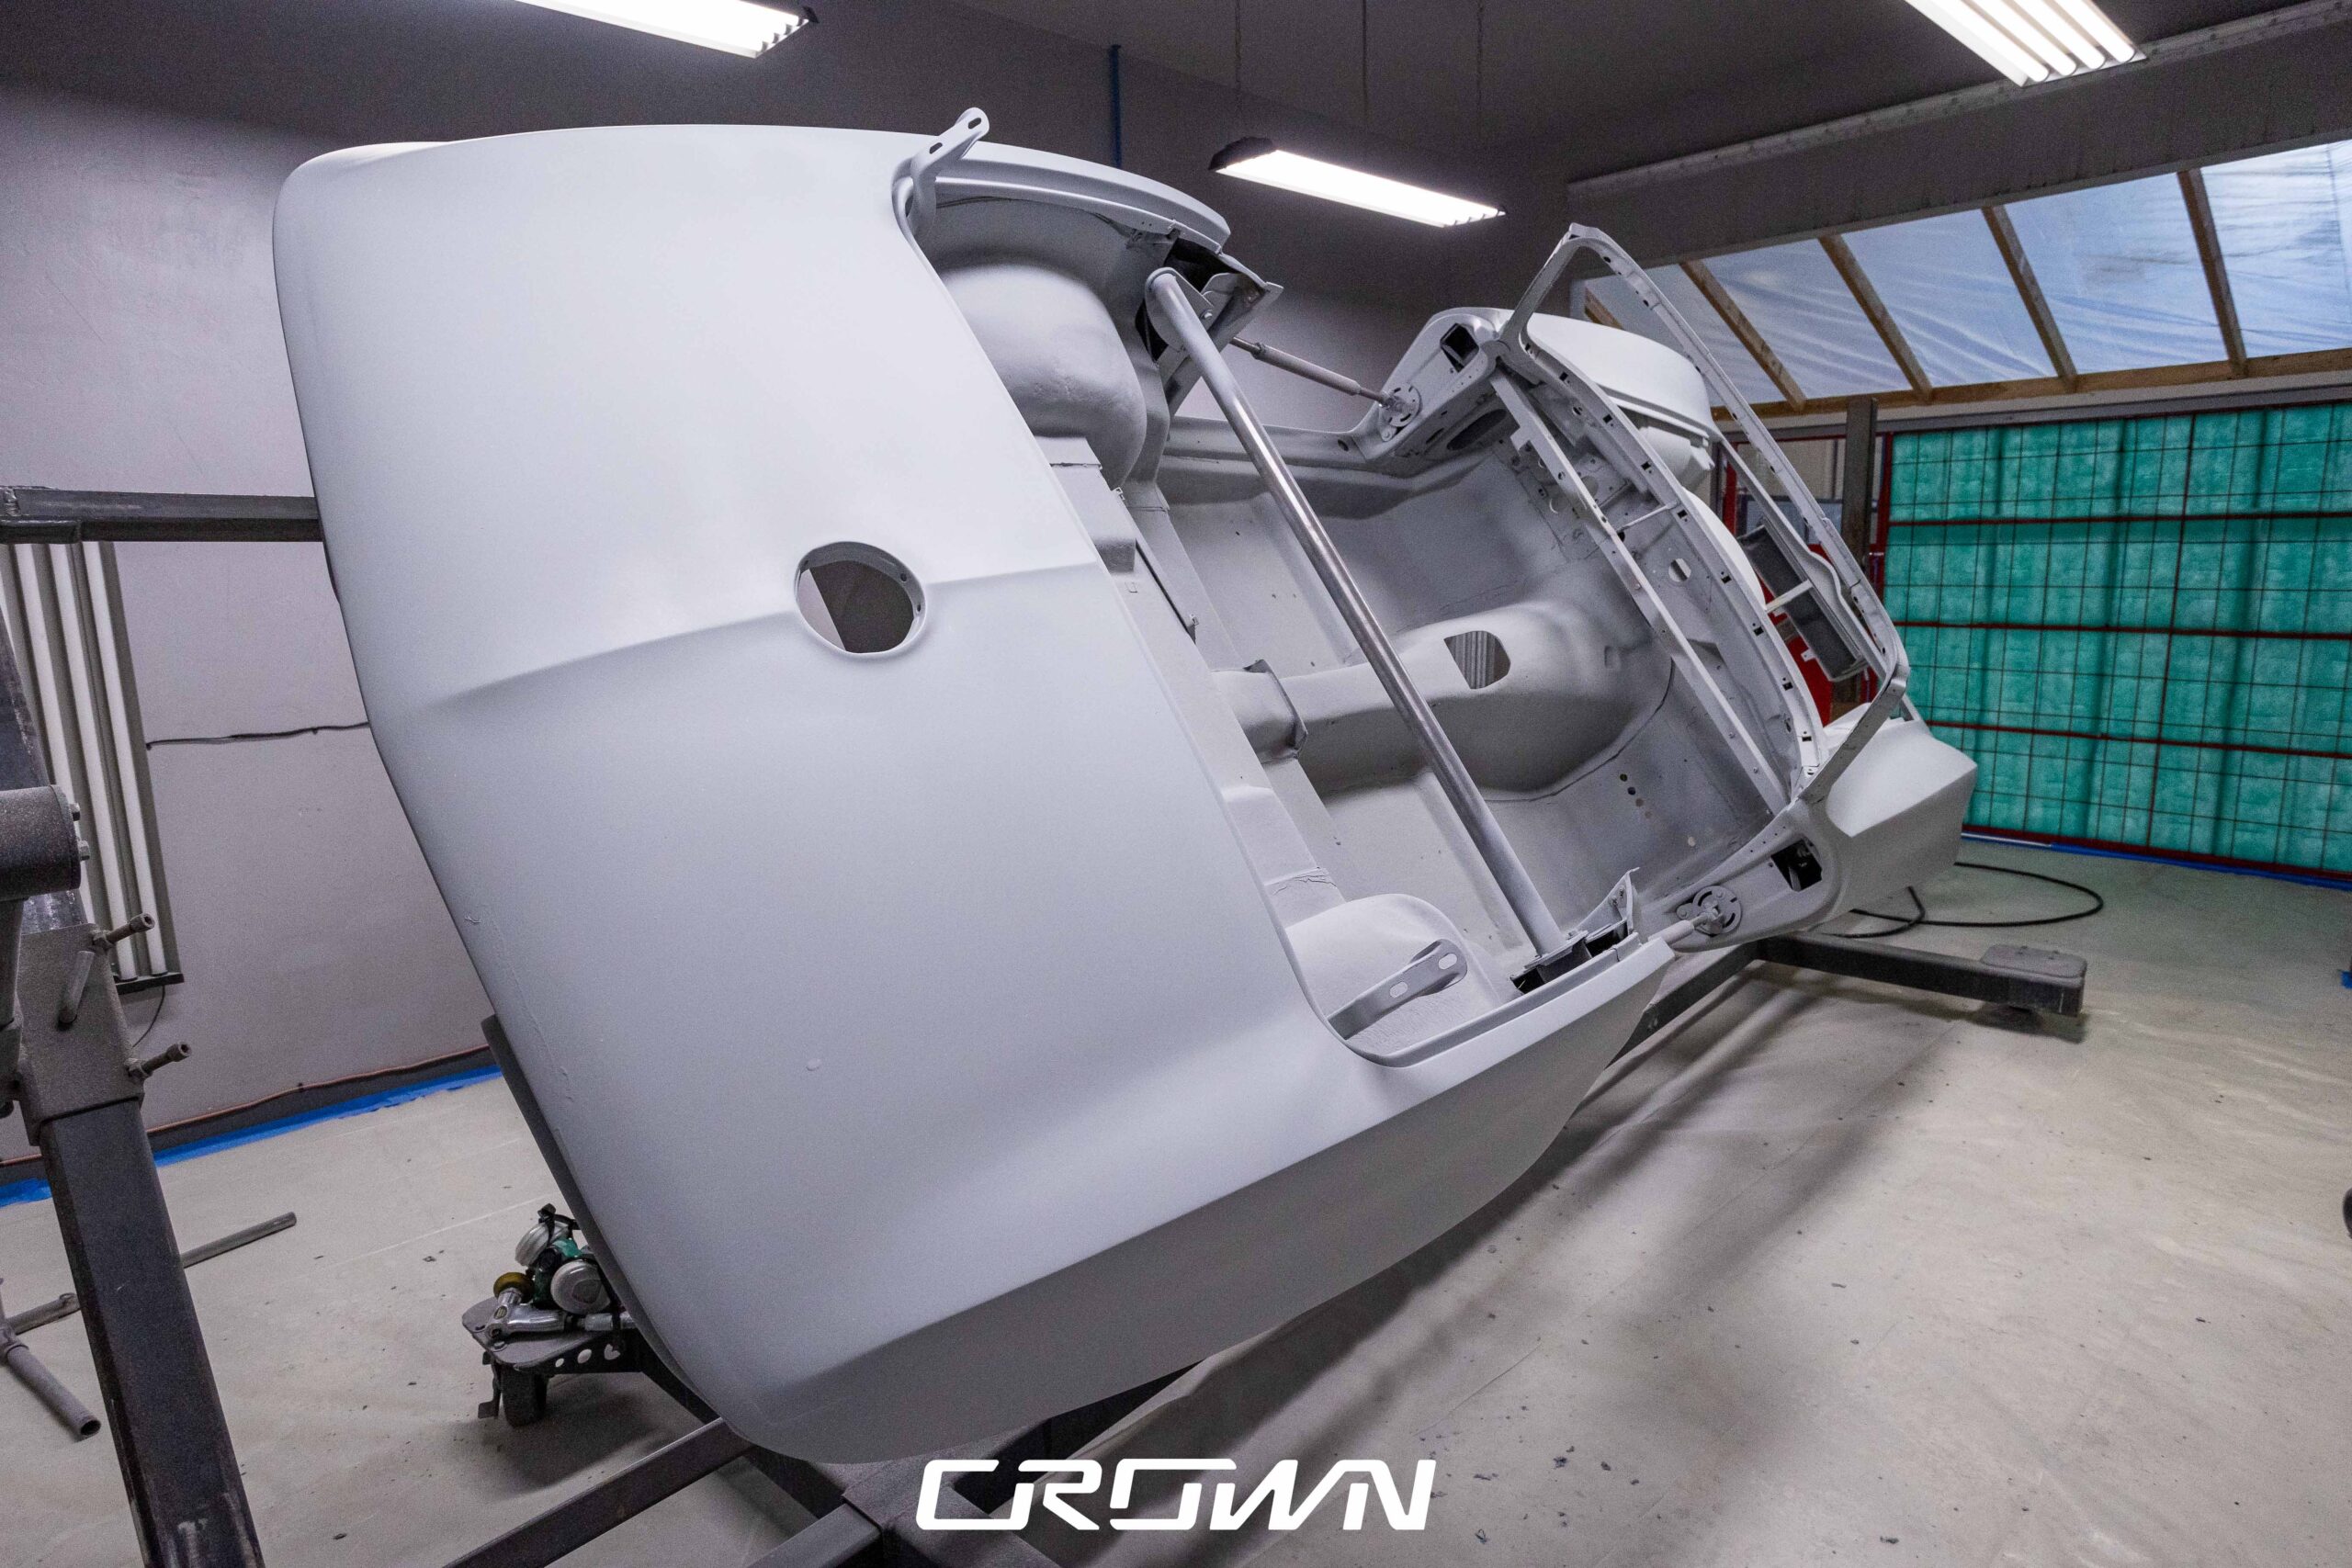 The 1963 Corvette Restomod Gets Ready for Final Paint.